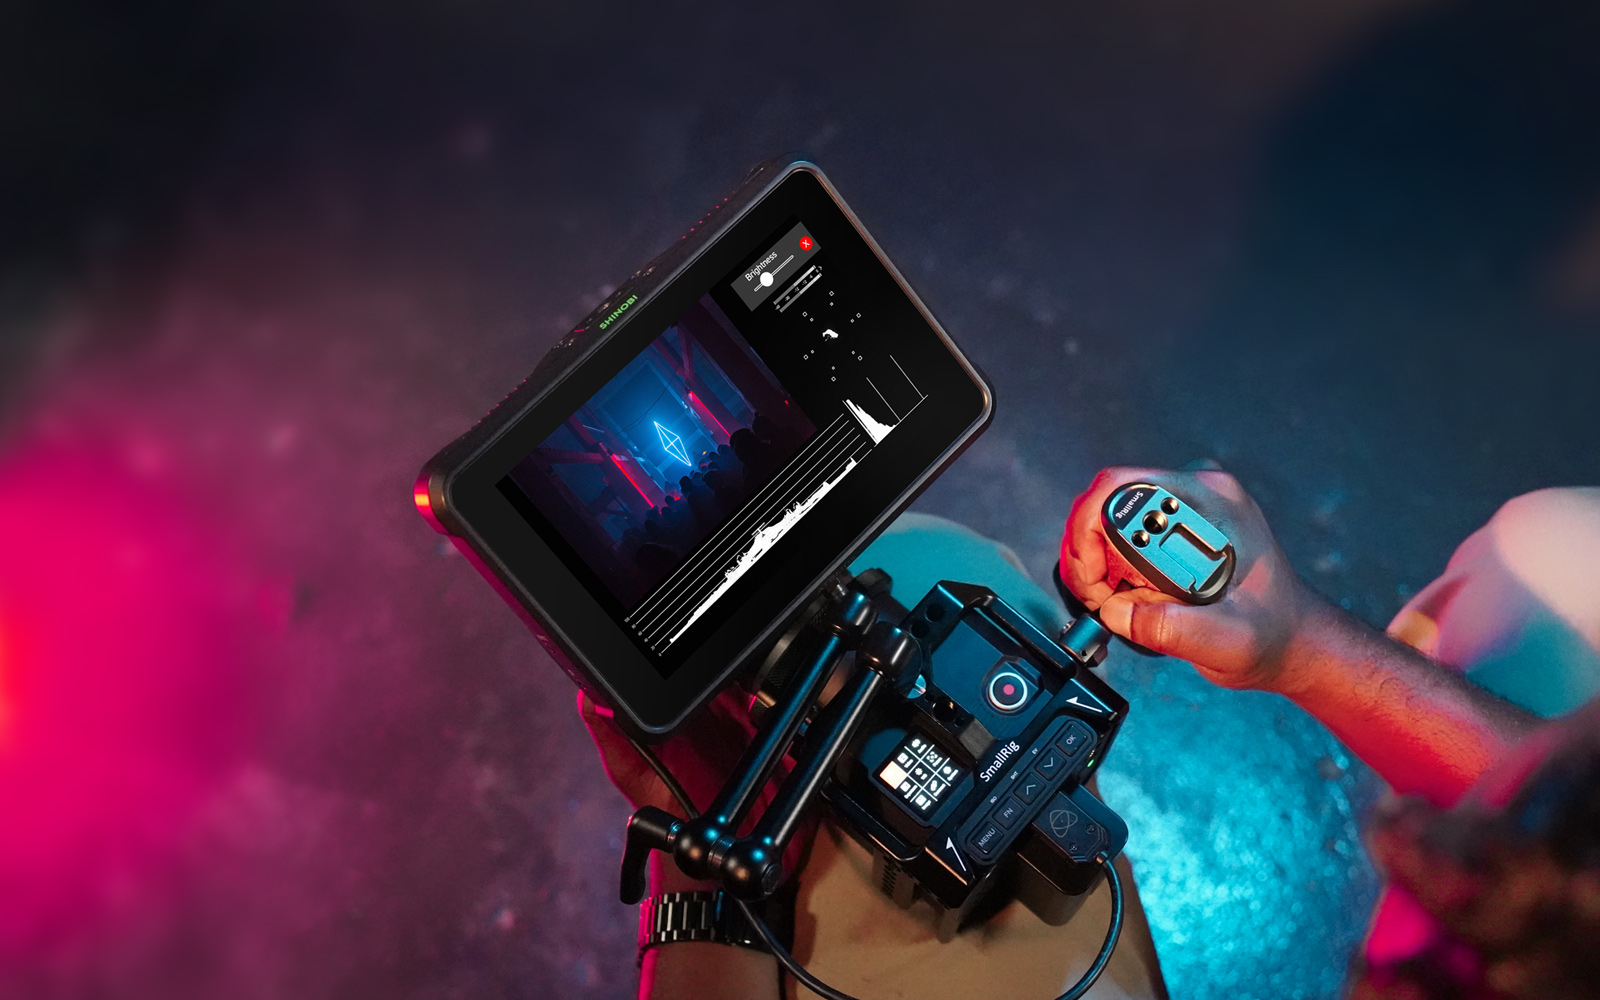 High angle Atomos Shinobi 7 promotional image showing the monitor mounted on top of a camera using a cine arm.